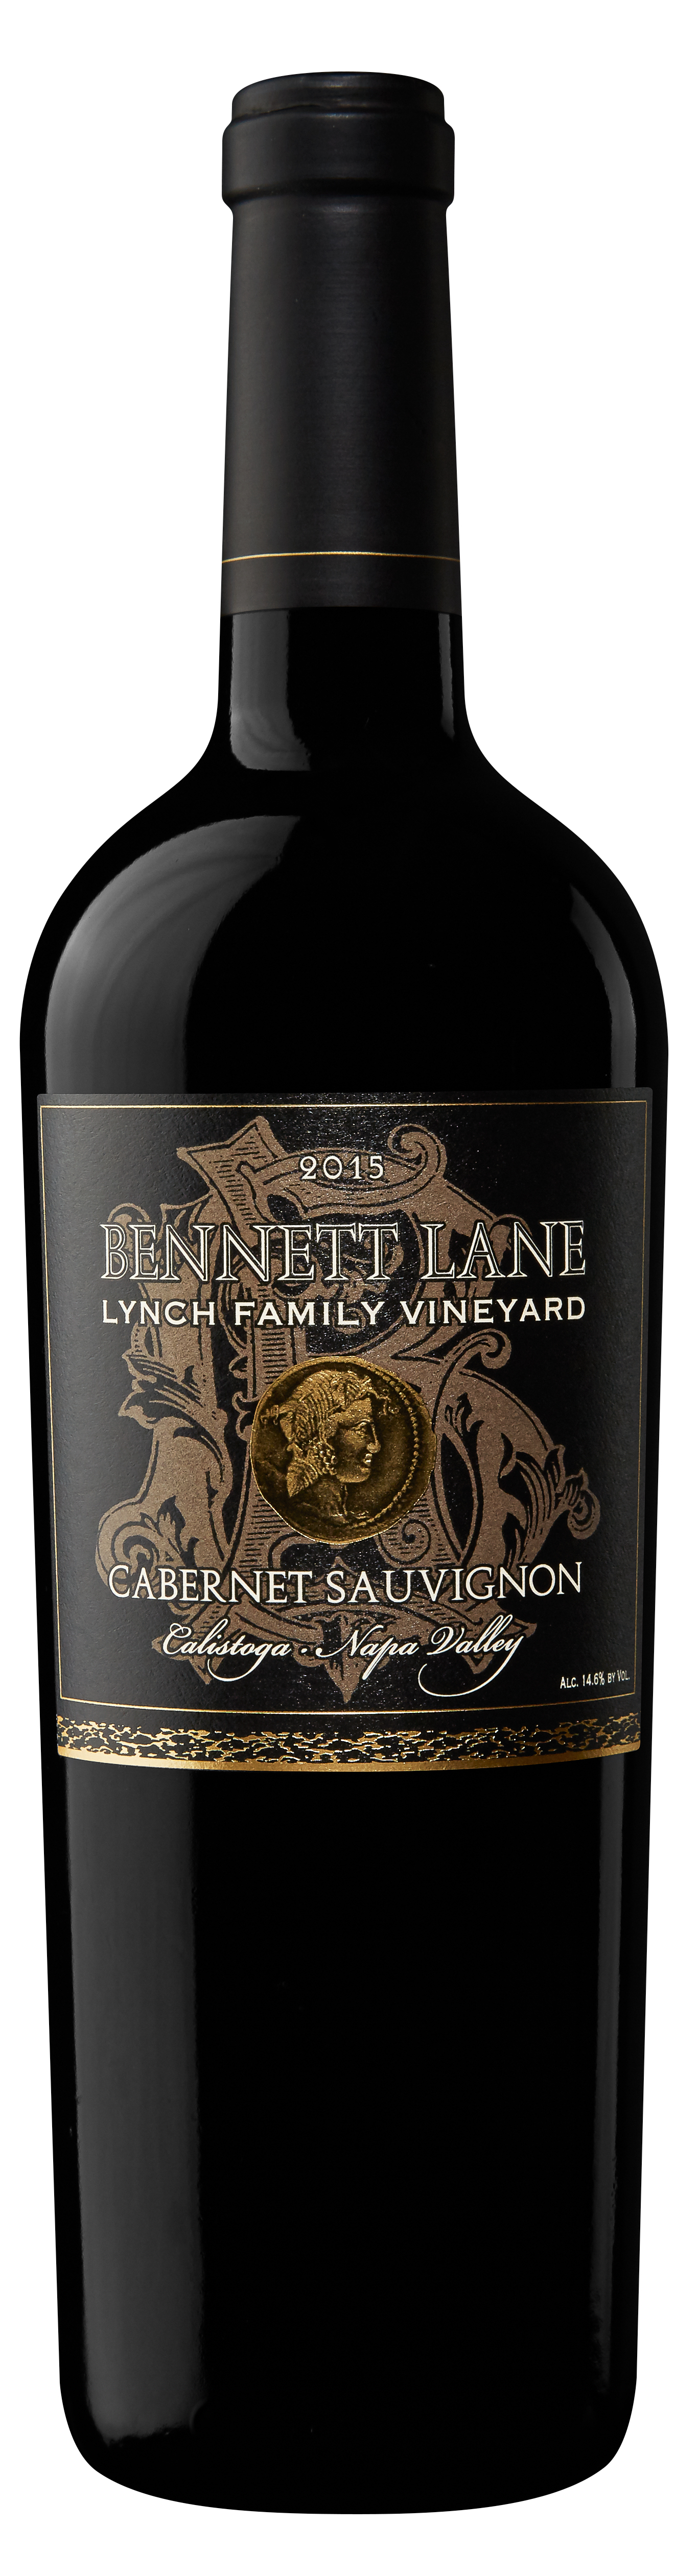 Product Image for 2014 Lynch Family Vineyard Cabernet Sauvignon